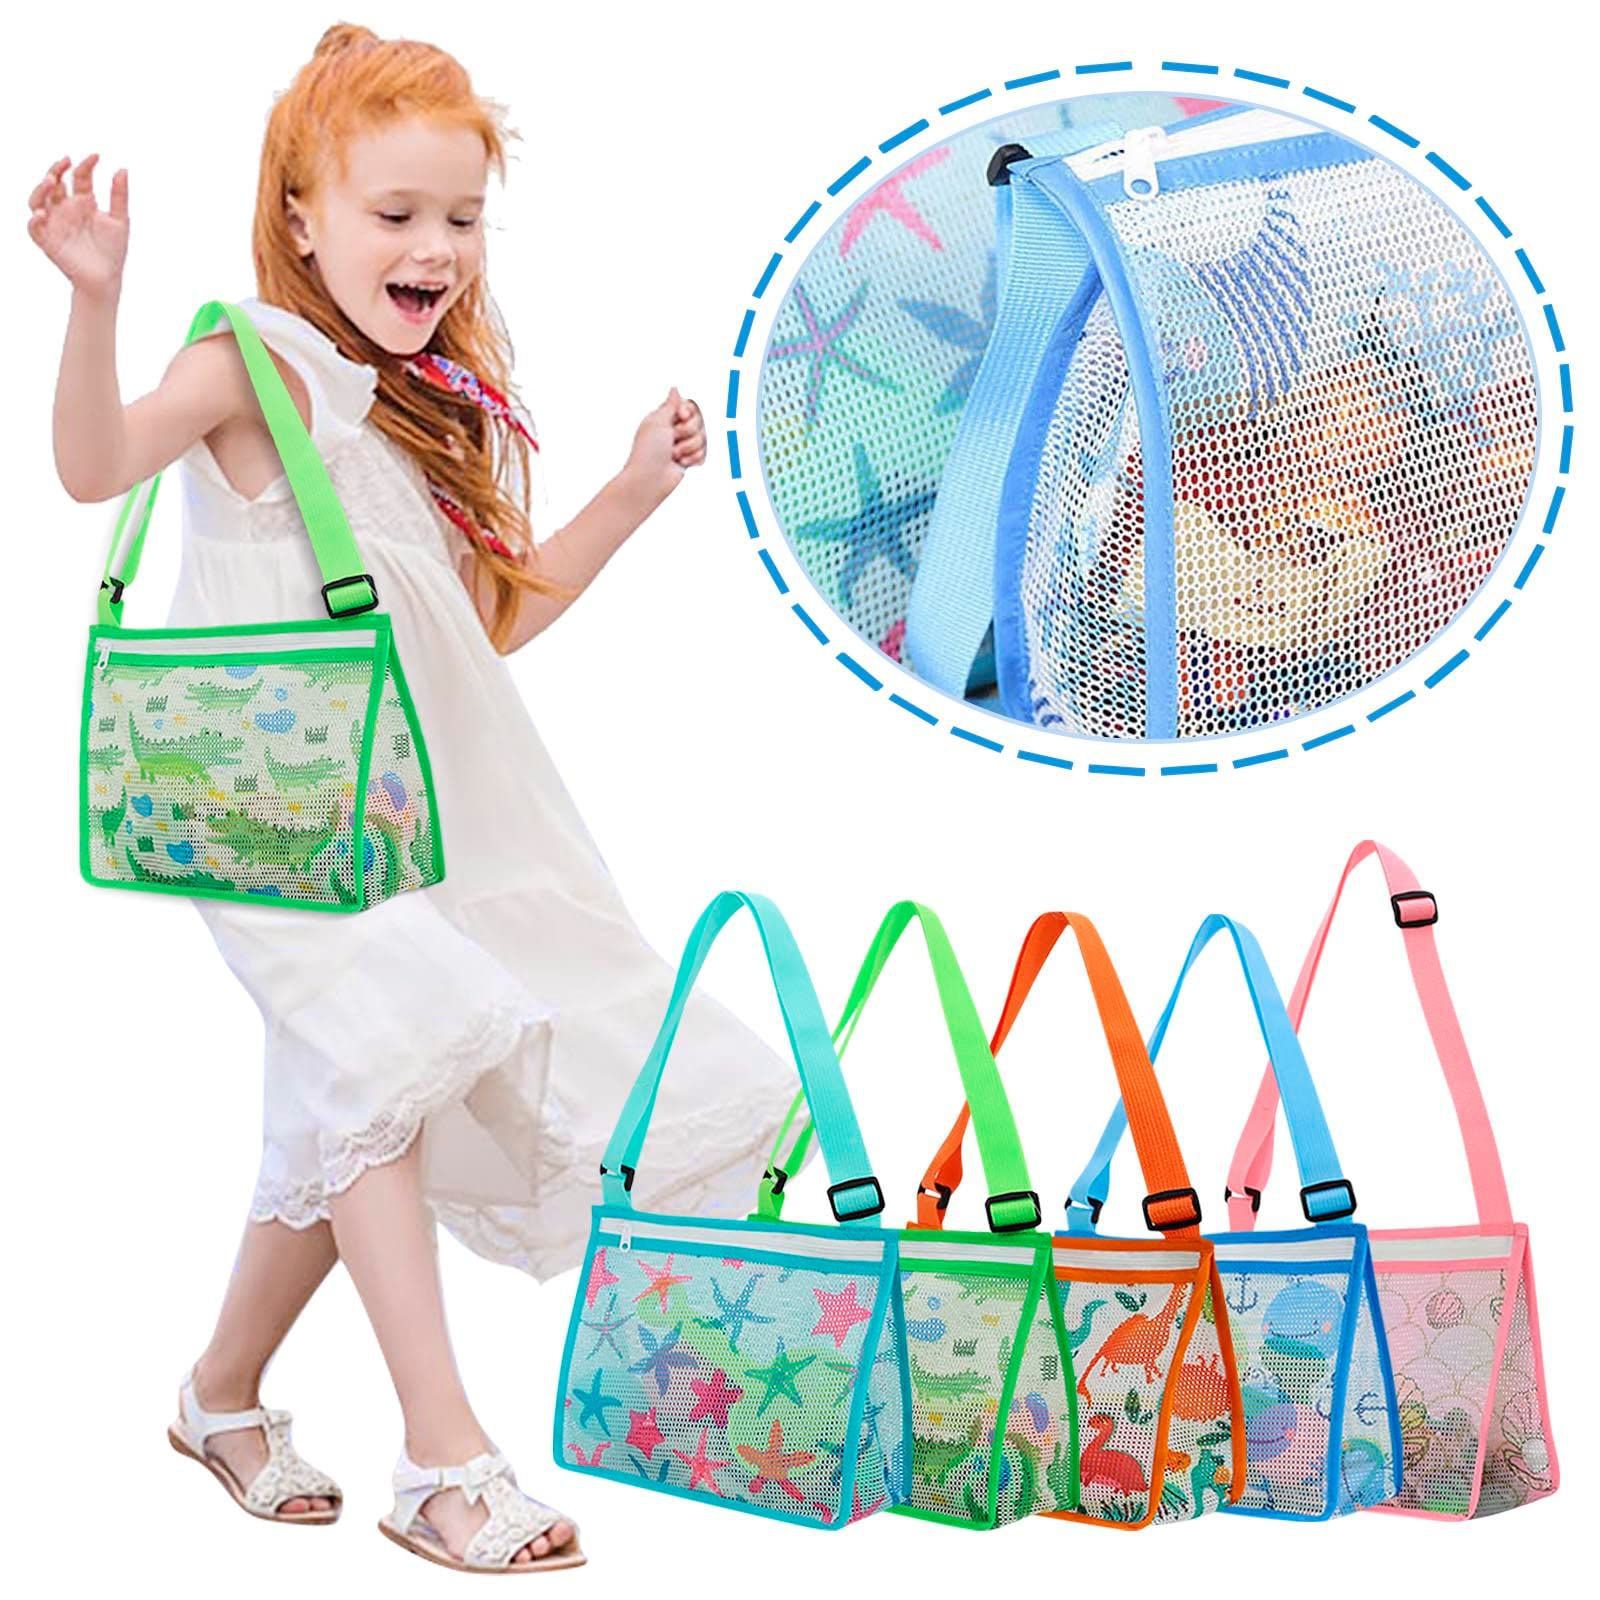 Kids Toy Mesh Bag Beach Shell Collection Bags Sand Toys Storage Mesh-Bag for Boys Girls Swimming Accessories Children Travel Gift